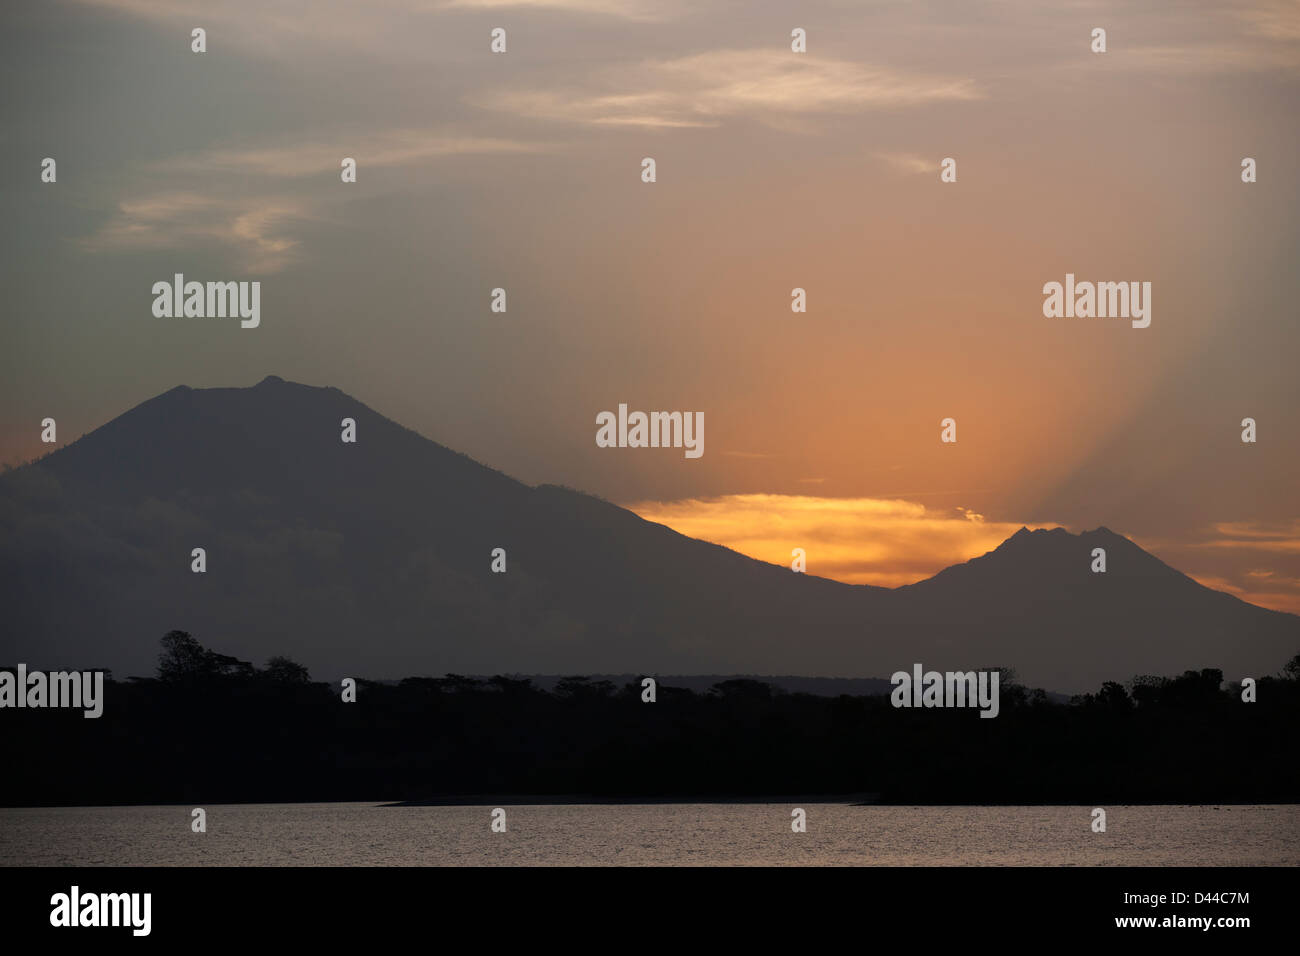 Panoramic view of the Raung (left) and Baluran (right) Volcanos on Eastern Java at sunset from Western Bali. Stock Photo